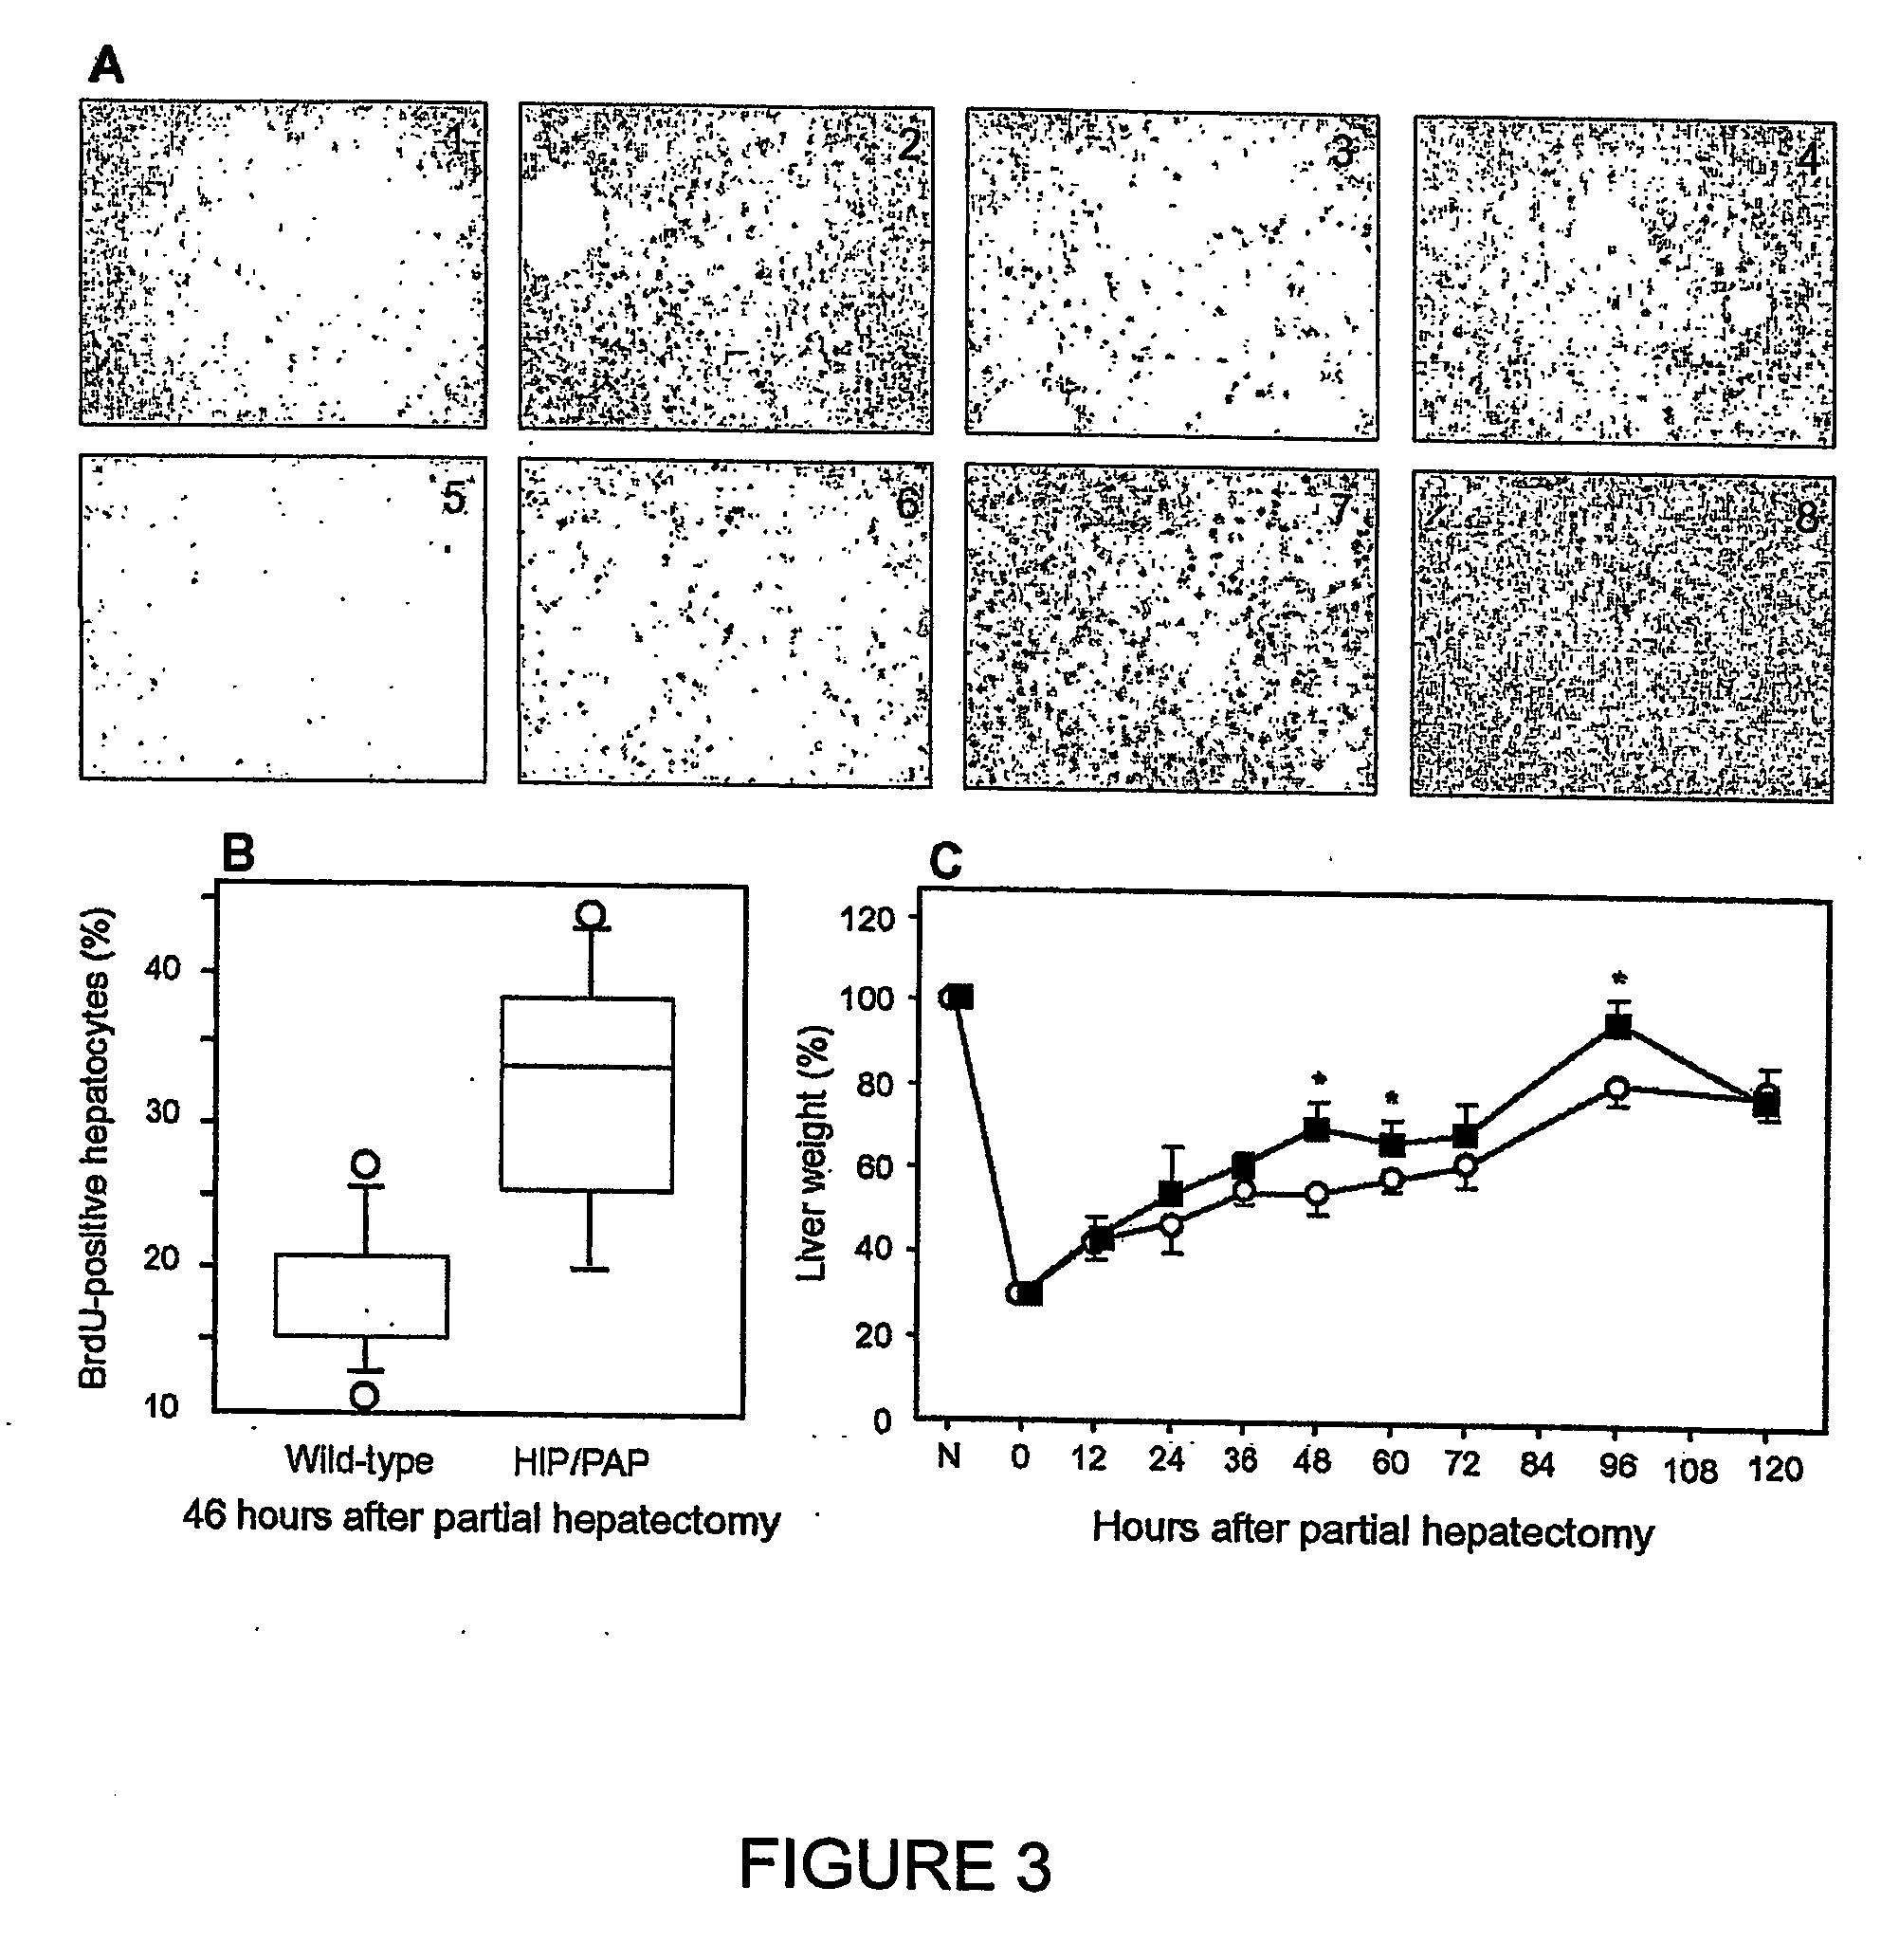 Hip/pap polypeptide compositions for use in liver regeneration and for the prevention of liver failure